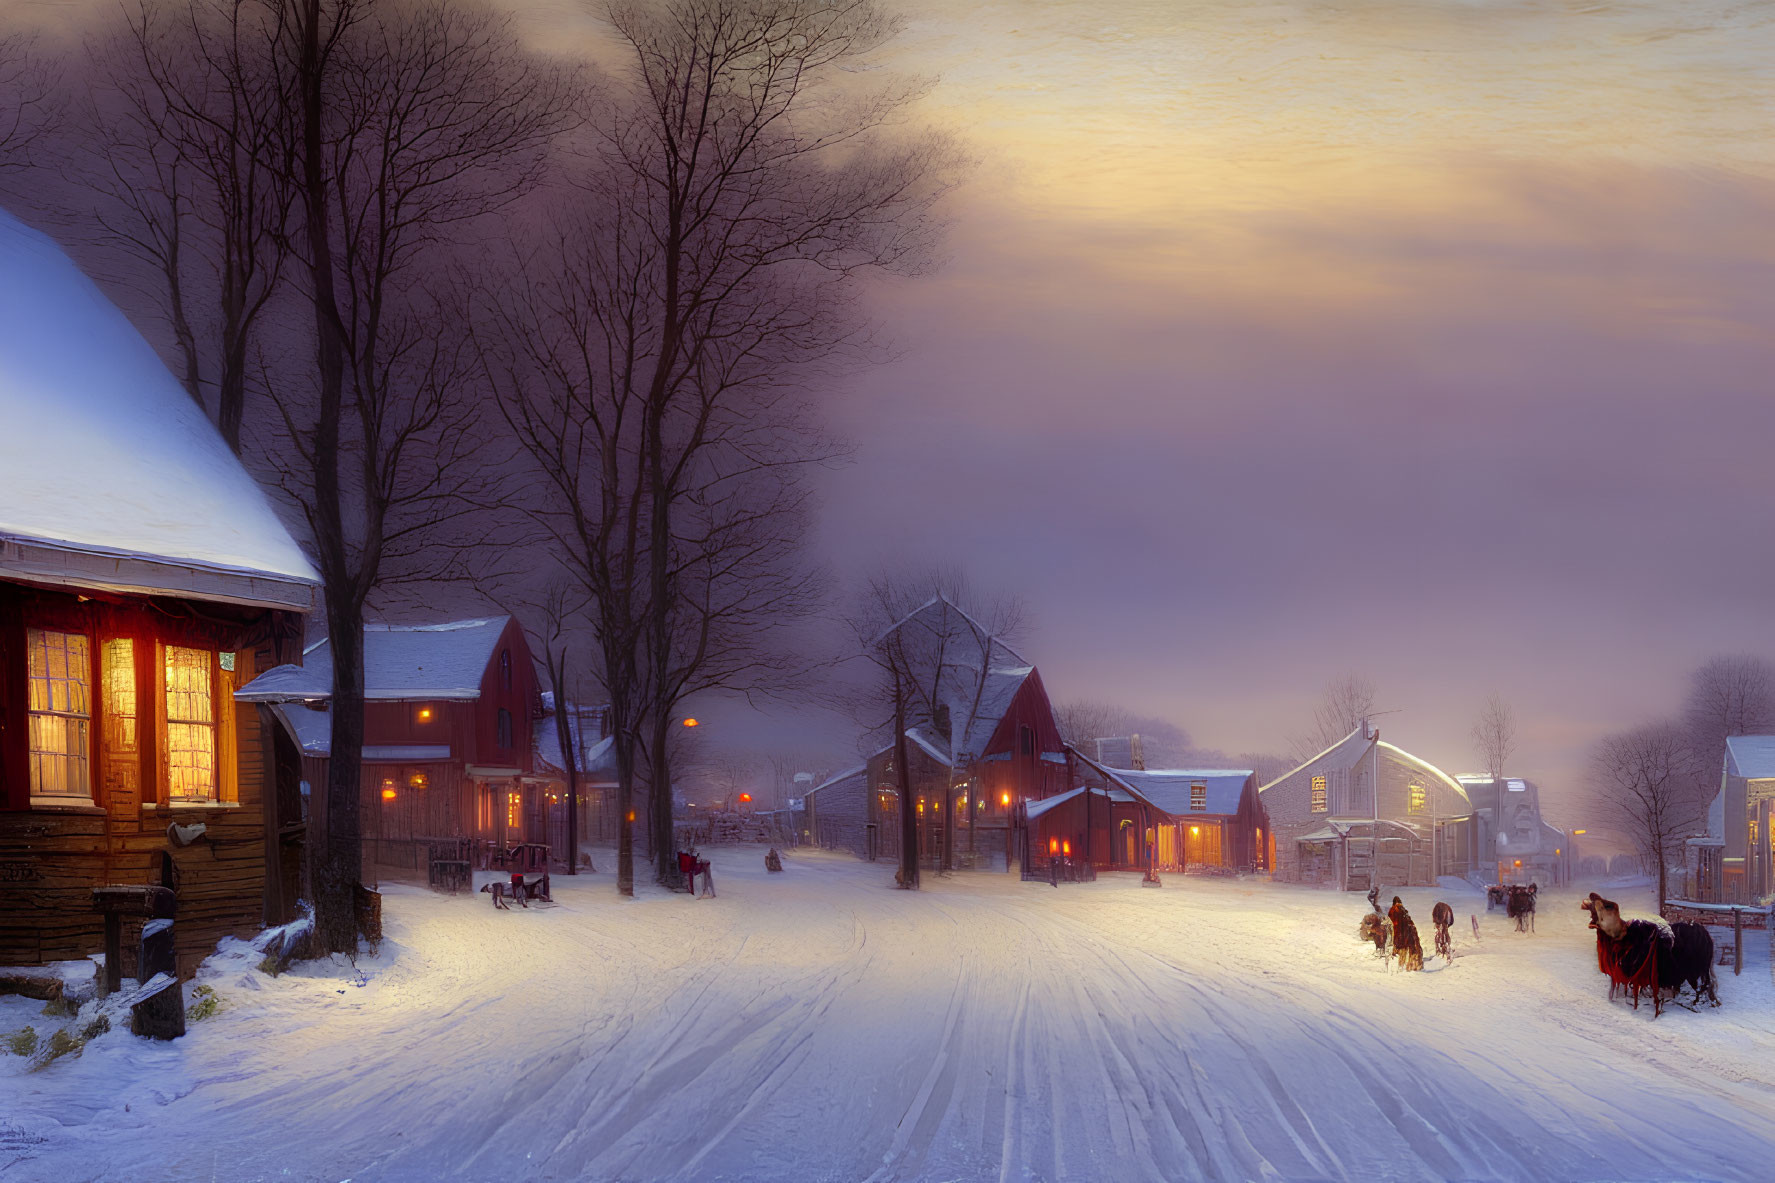 Snowy Twilight Scene: Traditional Houses, Glowing Lights, Sled Activity